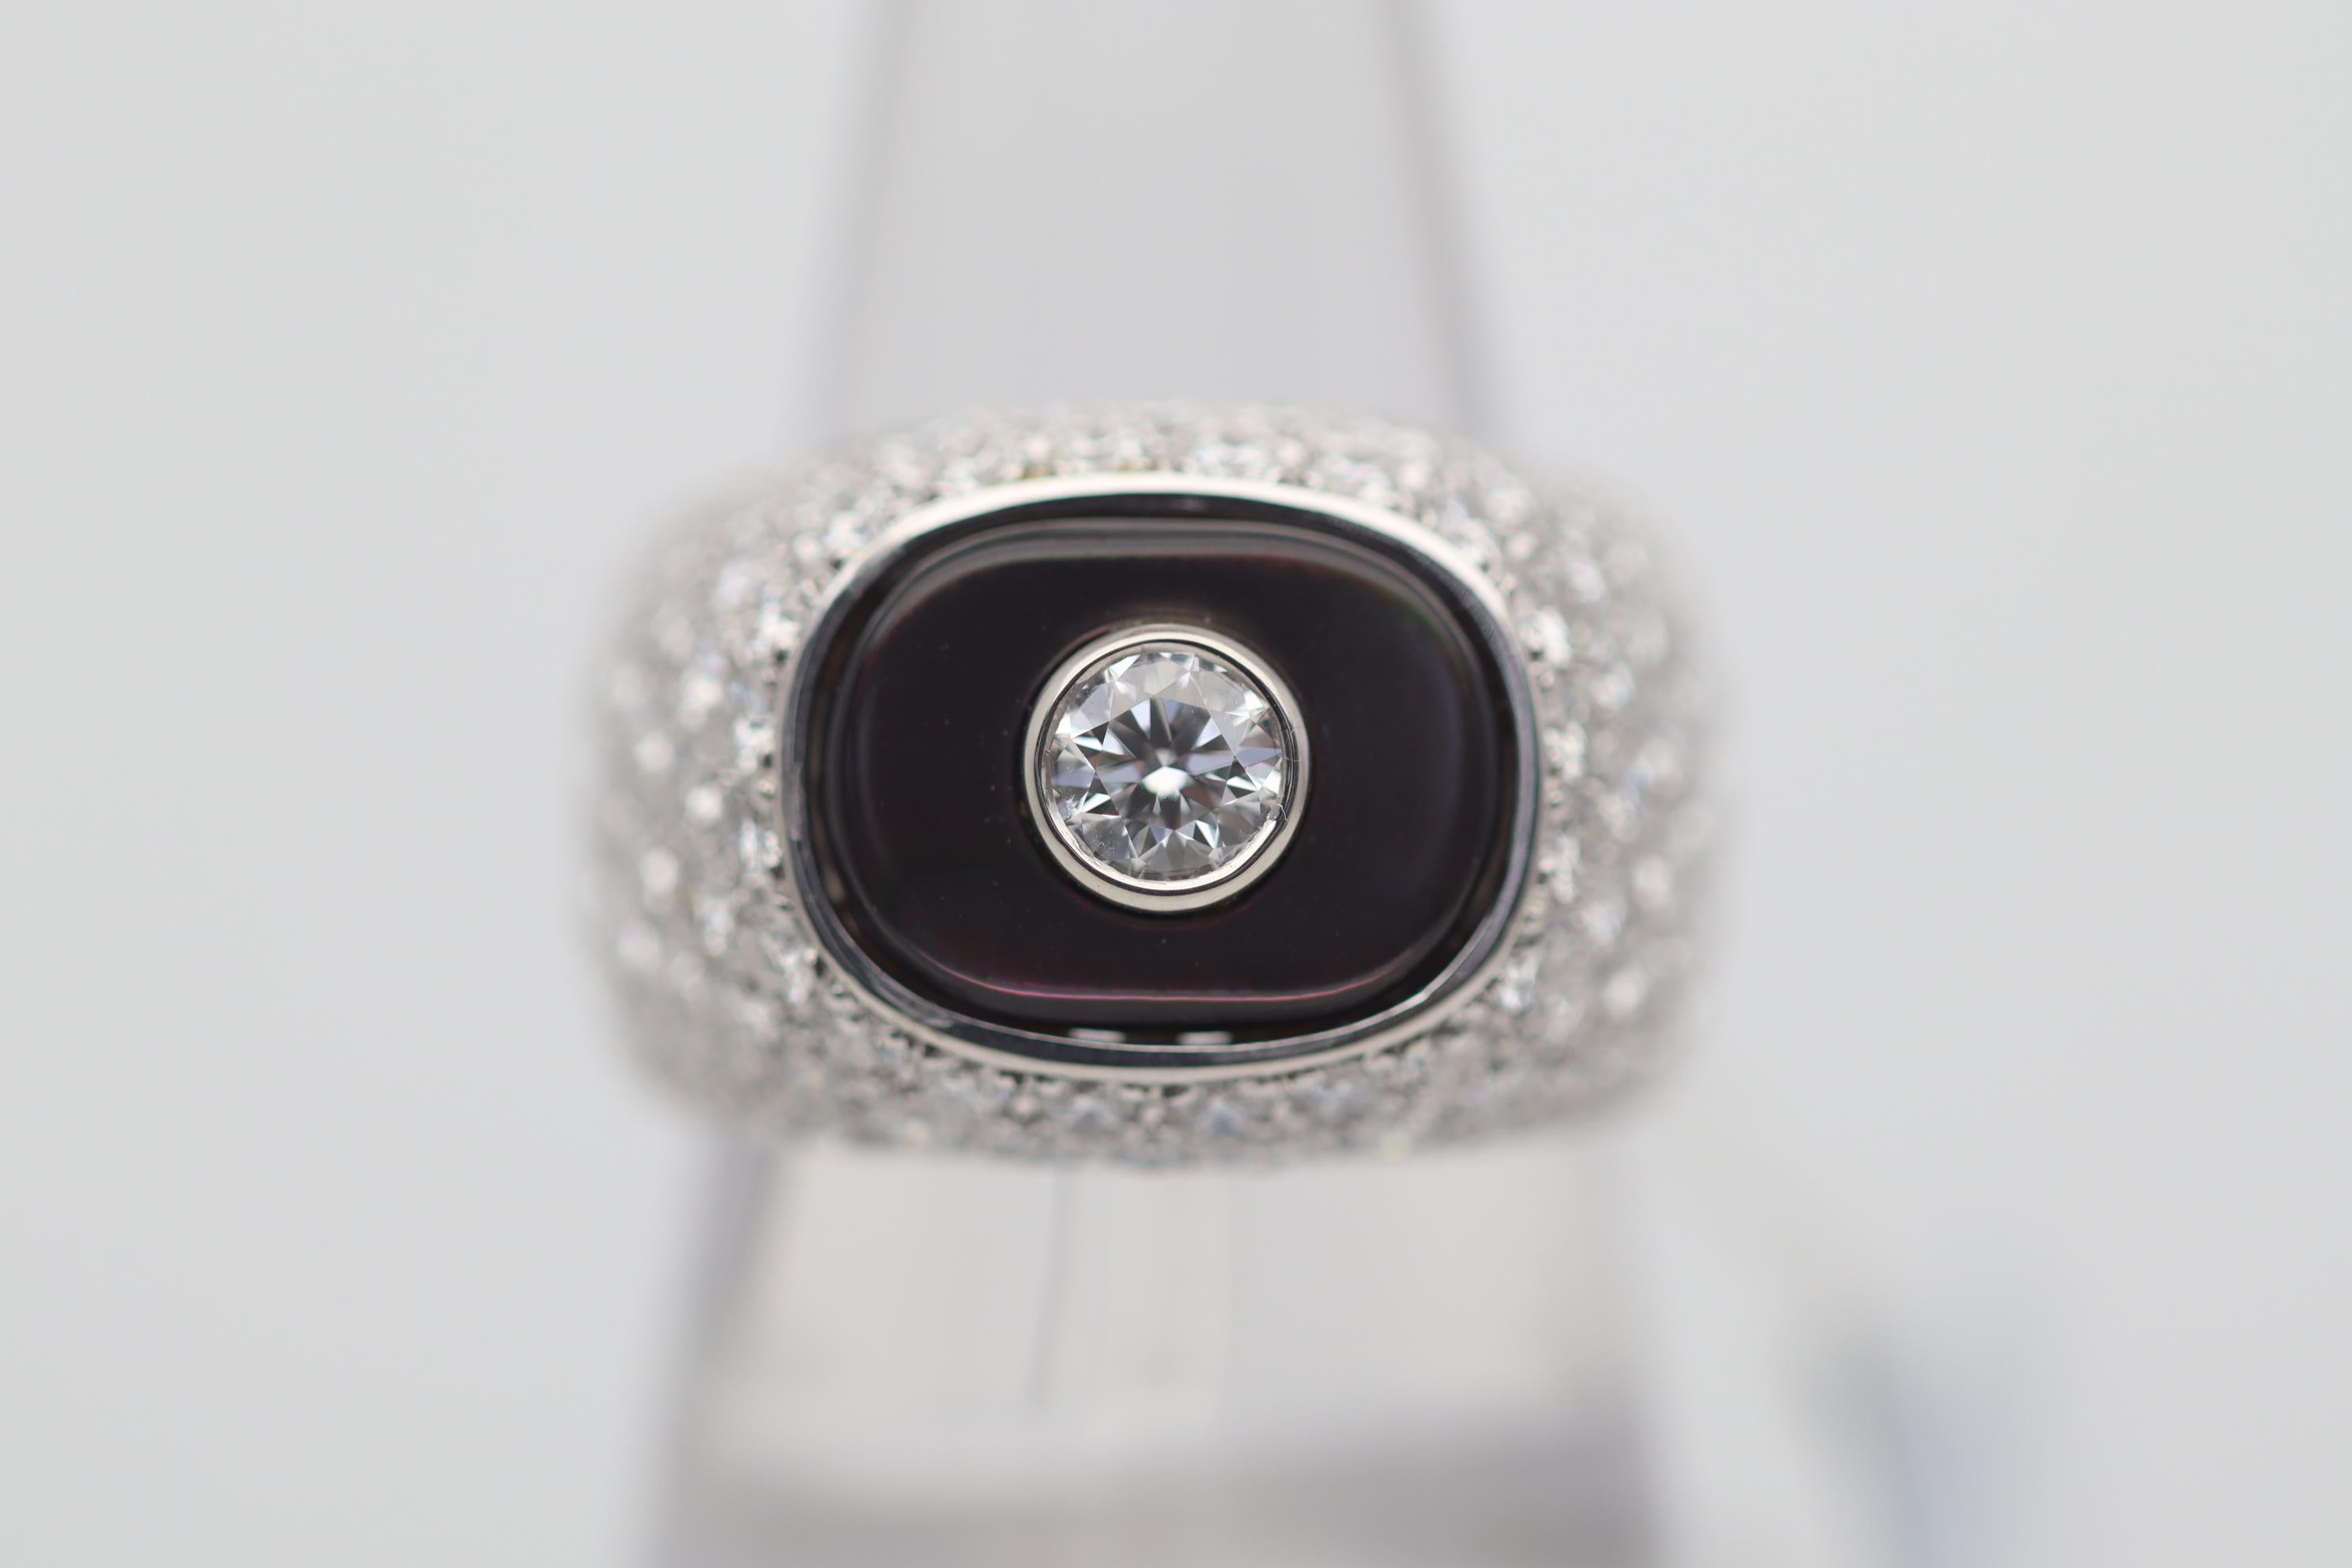 A lovely and substantial ring featuring diamonds and mother-of-pearl. The central diamond weighs 0.42 carats on its own, large and clean, while the side diamonds weigh a total of 3.77 carats. A fine piece of Tahitian mother-of-pearl with beautiful